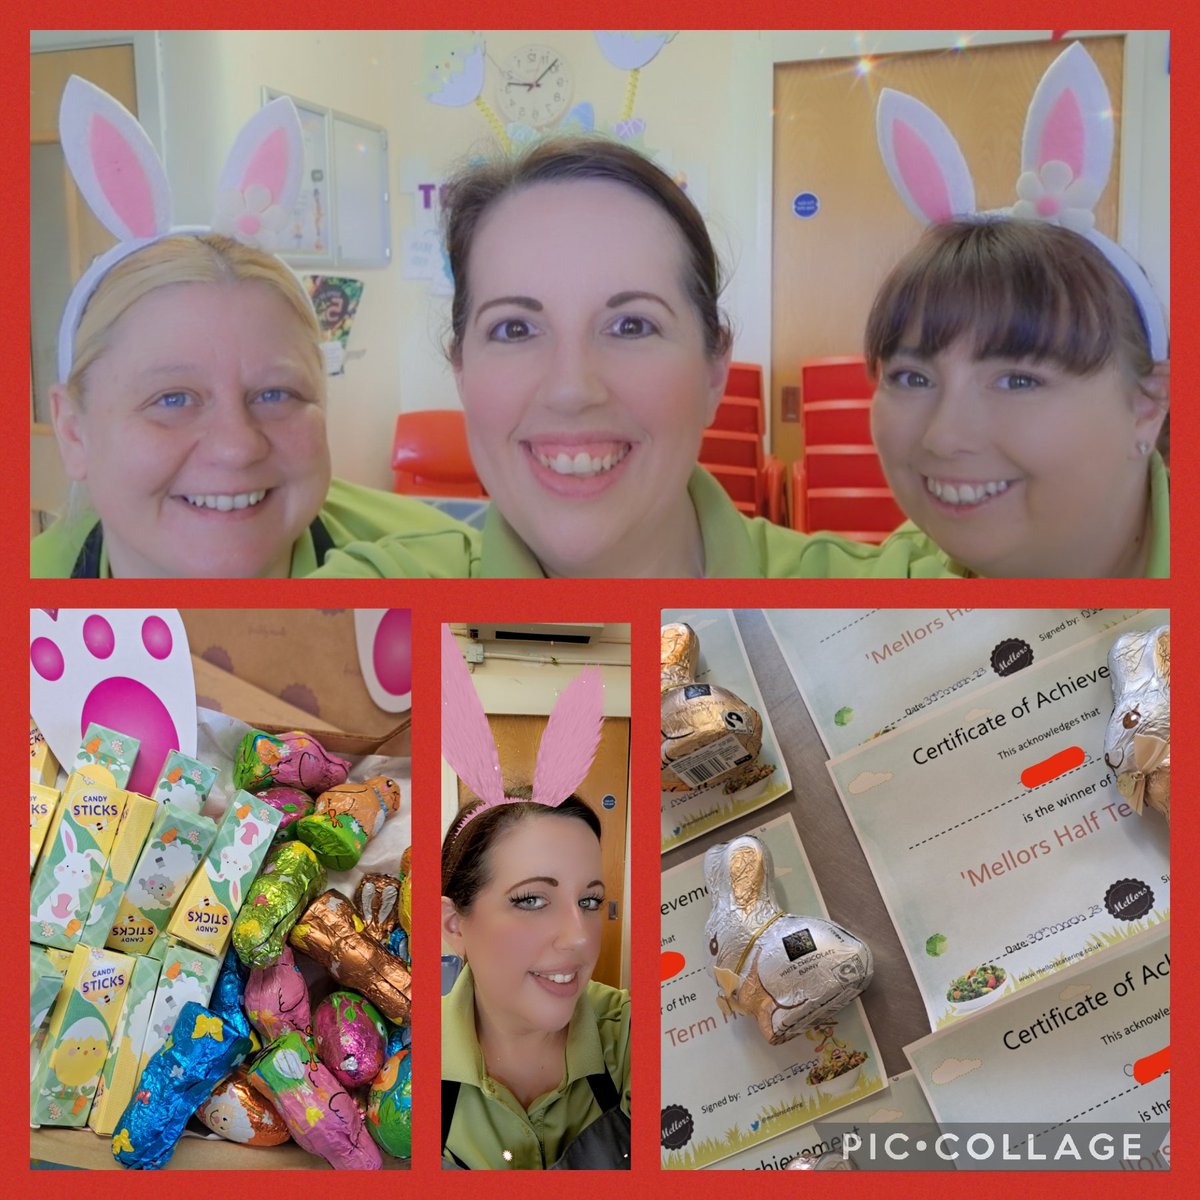 Lots of tasty treats on offer at Lordsgate today to celebrate Easter. 3 little Easter bunnies popped by early to give out our 'half term hero' awards too 🐰🐣 @Juliehorrocks3 @mellorscatering @ElaineL11697085